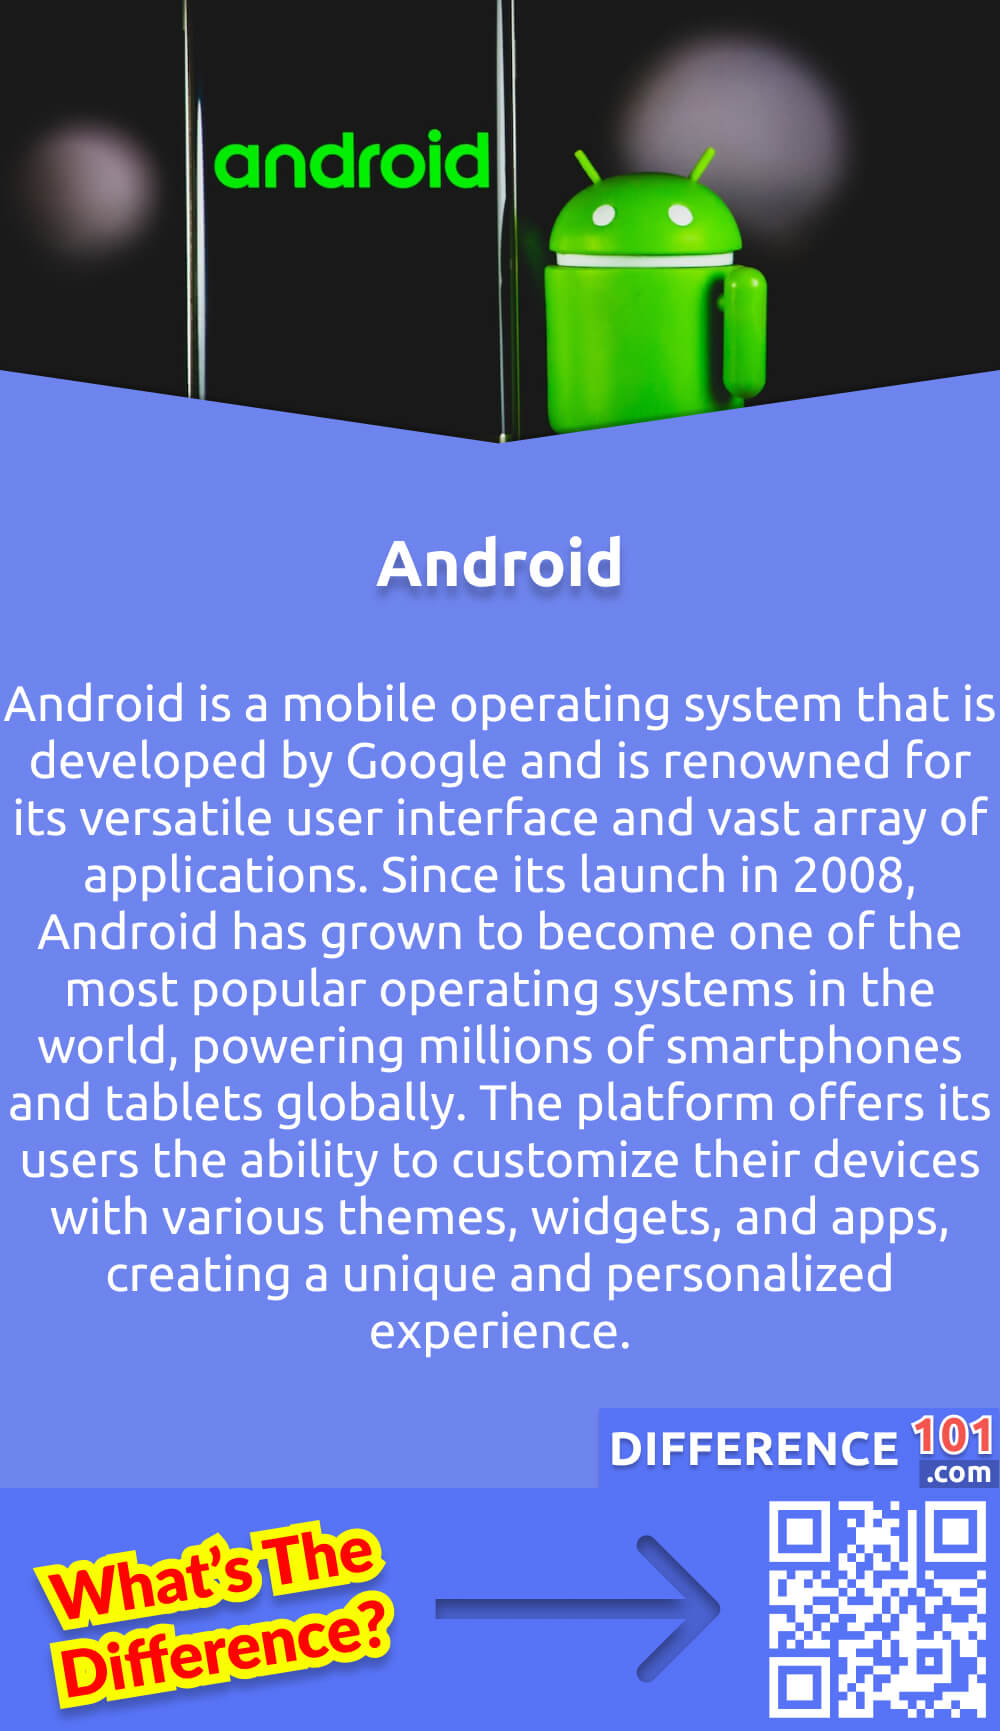 What Is Android? Android is a mobile operating system that is developed by Google and is renowned for its versatile user interface and vast array of applications. Since its launch in 2008, Android has grown to become one of the most popular operating systems in the world, powering millions of smartphones and tablets globally. The platform offers its users the ability to customize their devices with various themes, widgets, and apps, creating a unique and personalized experience. Android includes various features such as Google Assistant, which allows the user to interact with their device through voice commands, and the capability to access Google Play Store to download various applications. Overall, Android provides an exceptional mobile experience, and its versatility and integration with other Google services make it an excellent choice for users globally.